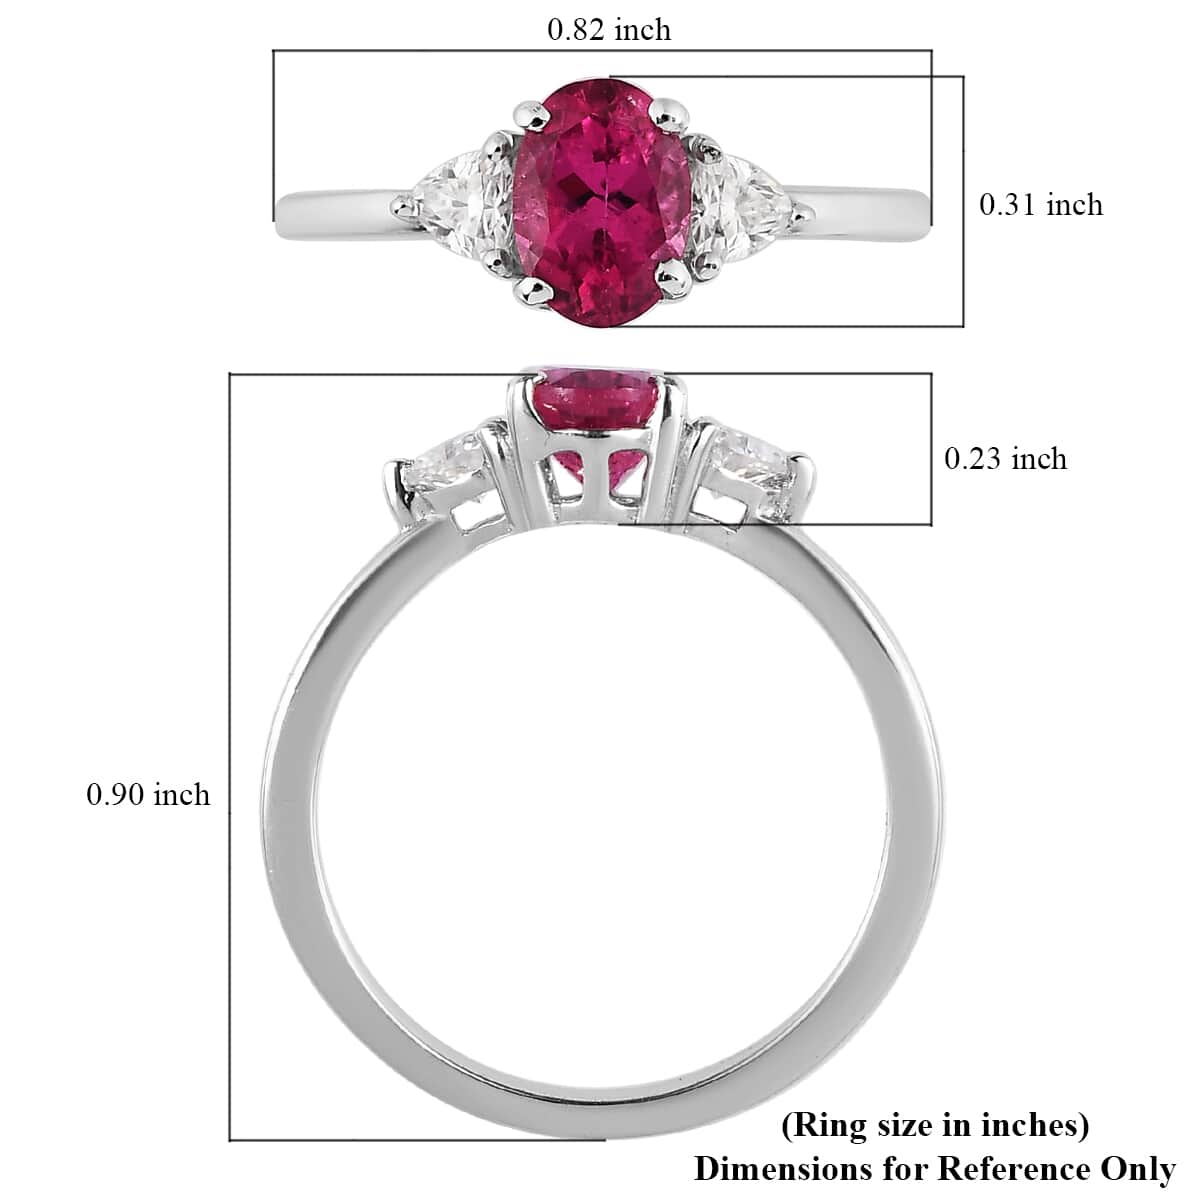 0.82 Carat Oval Red Pink Sapphire for Custom Work - Inventory Code